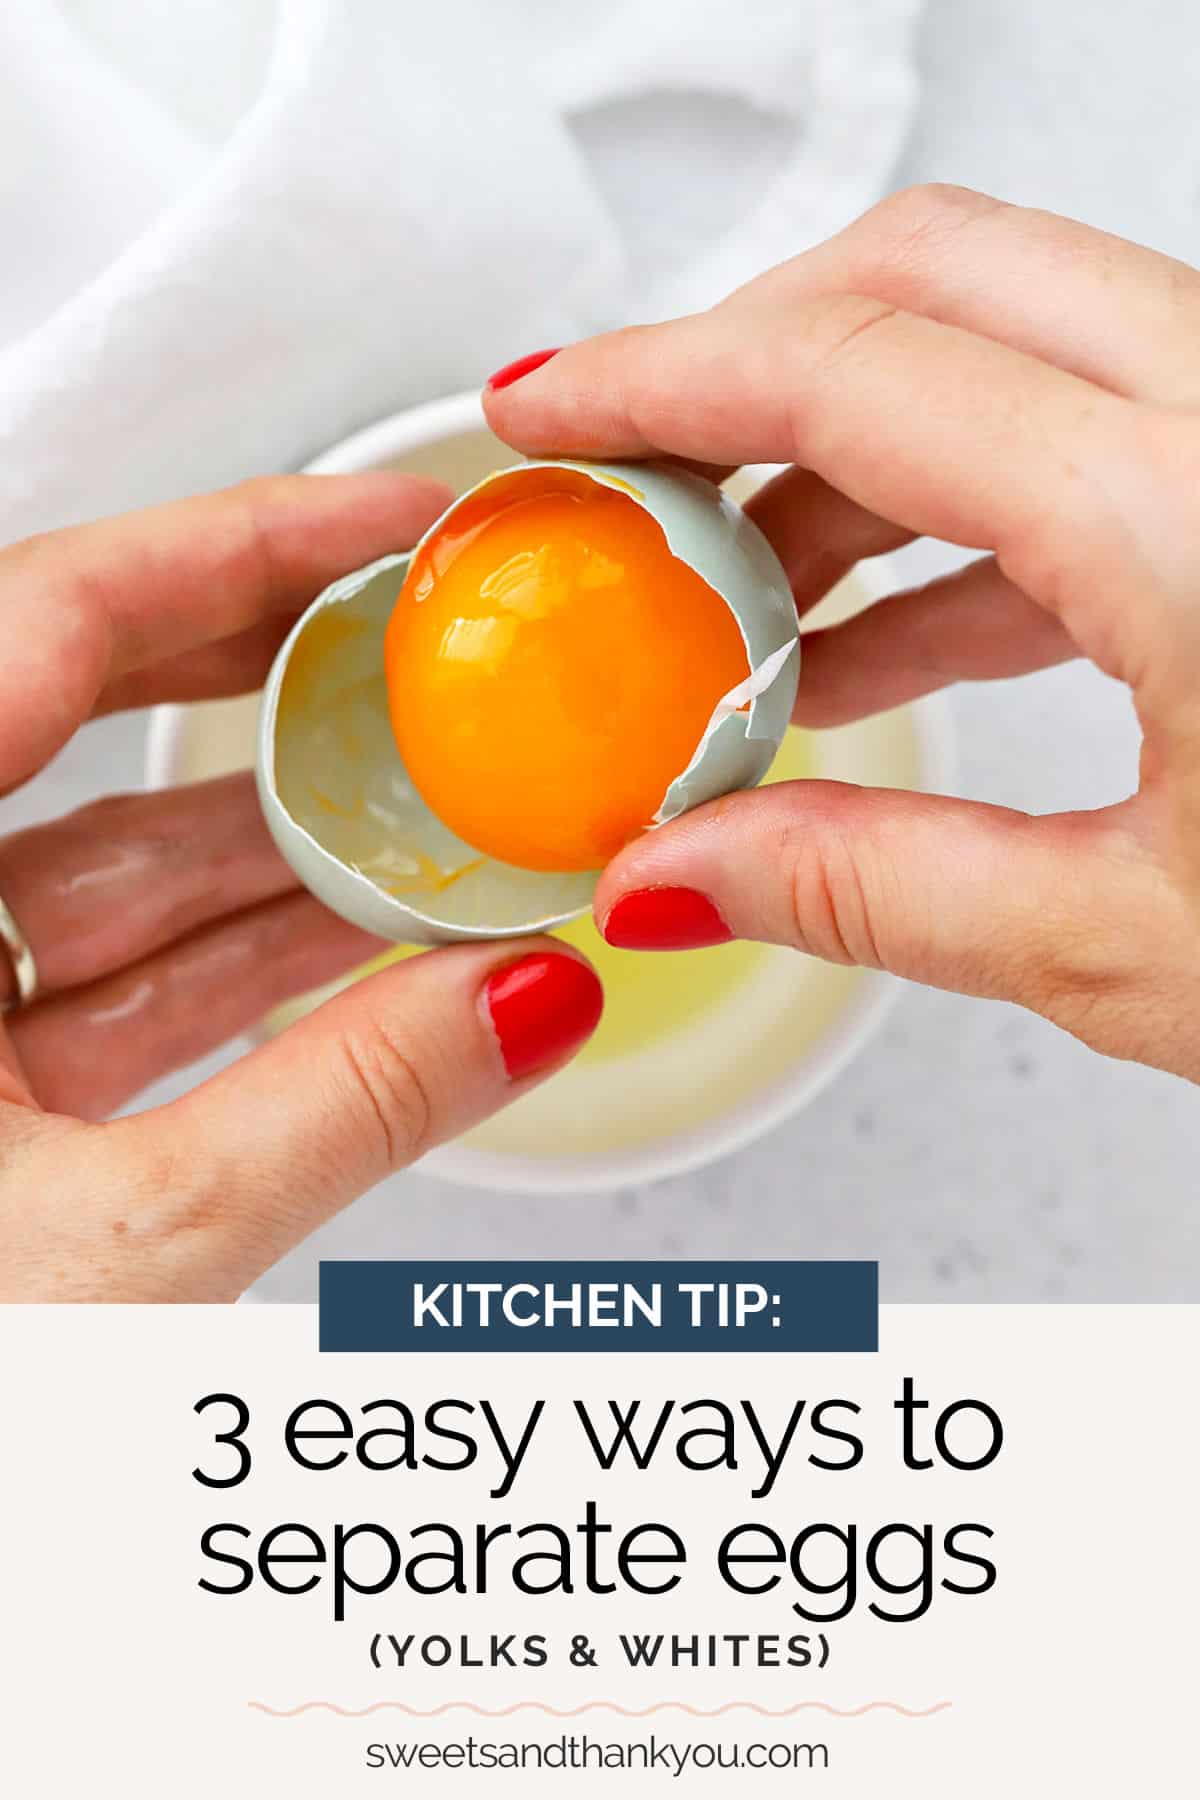 How to Separate Eggs - Learn 3 ways to separate egg whites and yolks for recipes. You’ll be ready to whip up meringues, add texture to cookies, and more! // How to separate eggs // How to separate egg yolks and whites // Baking Tips // Baking Basics // Baking Tutorial // Separating eggs / how to separate egg whites / how to separate egg yolk / how to separate an egg / how to separate eggs without a separator / how to separate eggs with your hands / how to separate eggs with the shells